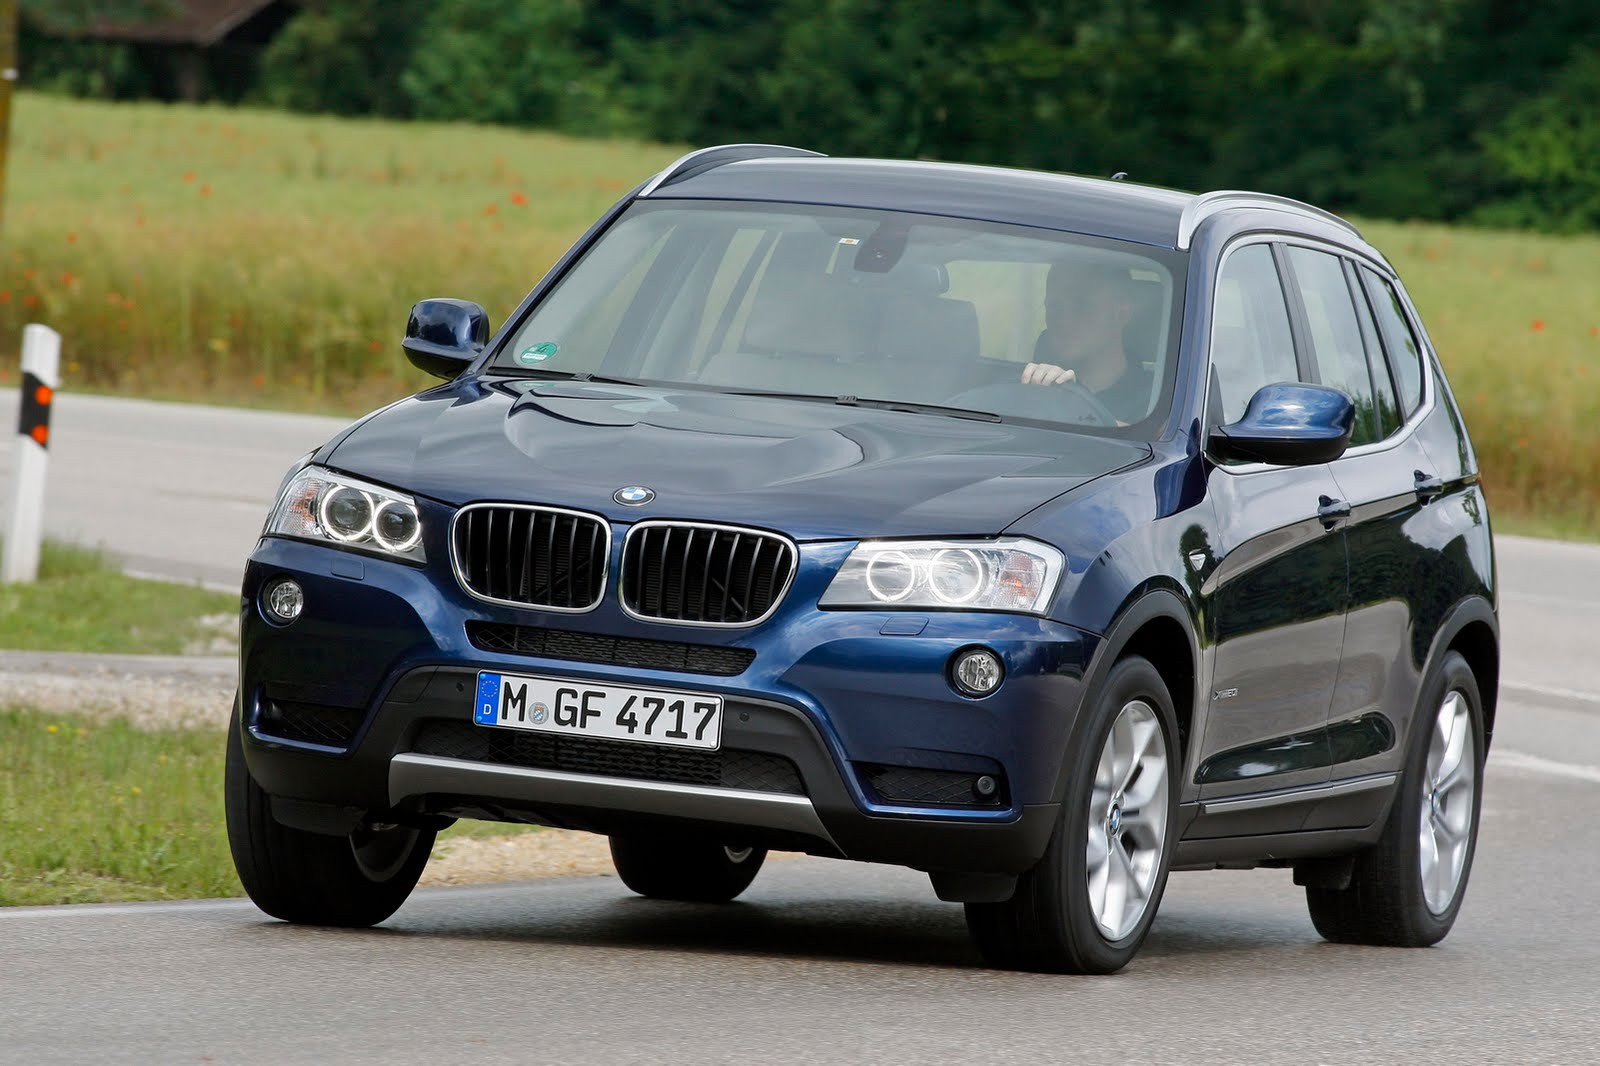 BMW X4 M reportedly in the works